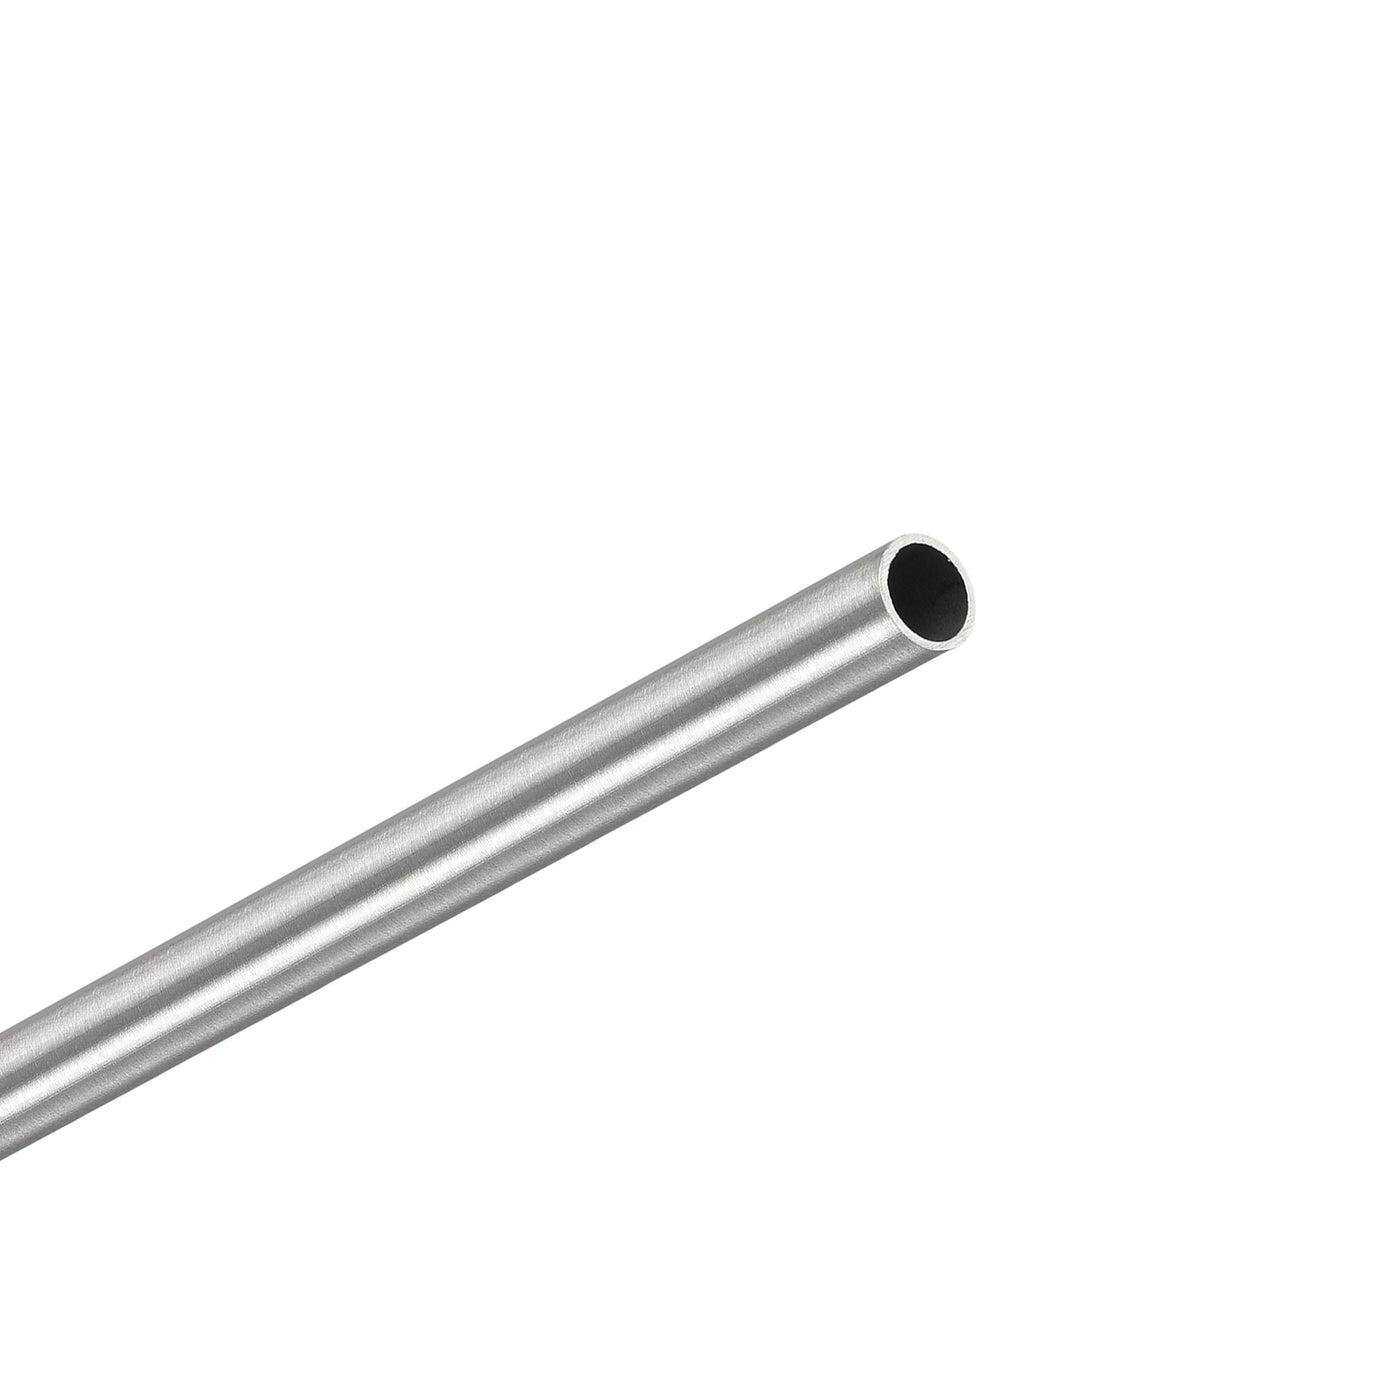 Uxcell Uxcell 304 Stainless Steel Round Tube 2mm OD 0.15mm Wall Thickness 300mm Length 3 Pcs